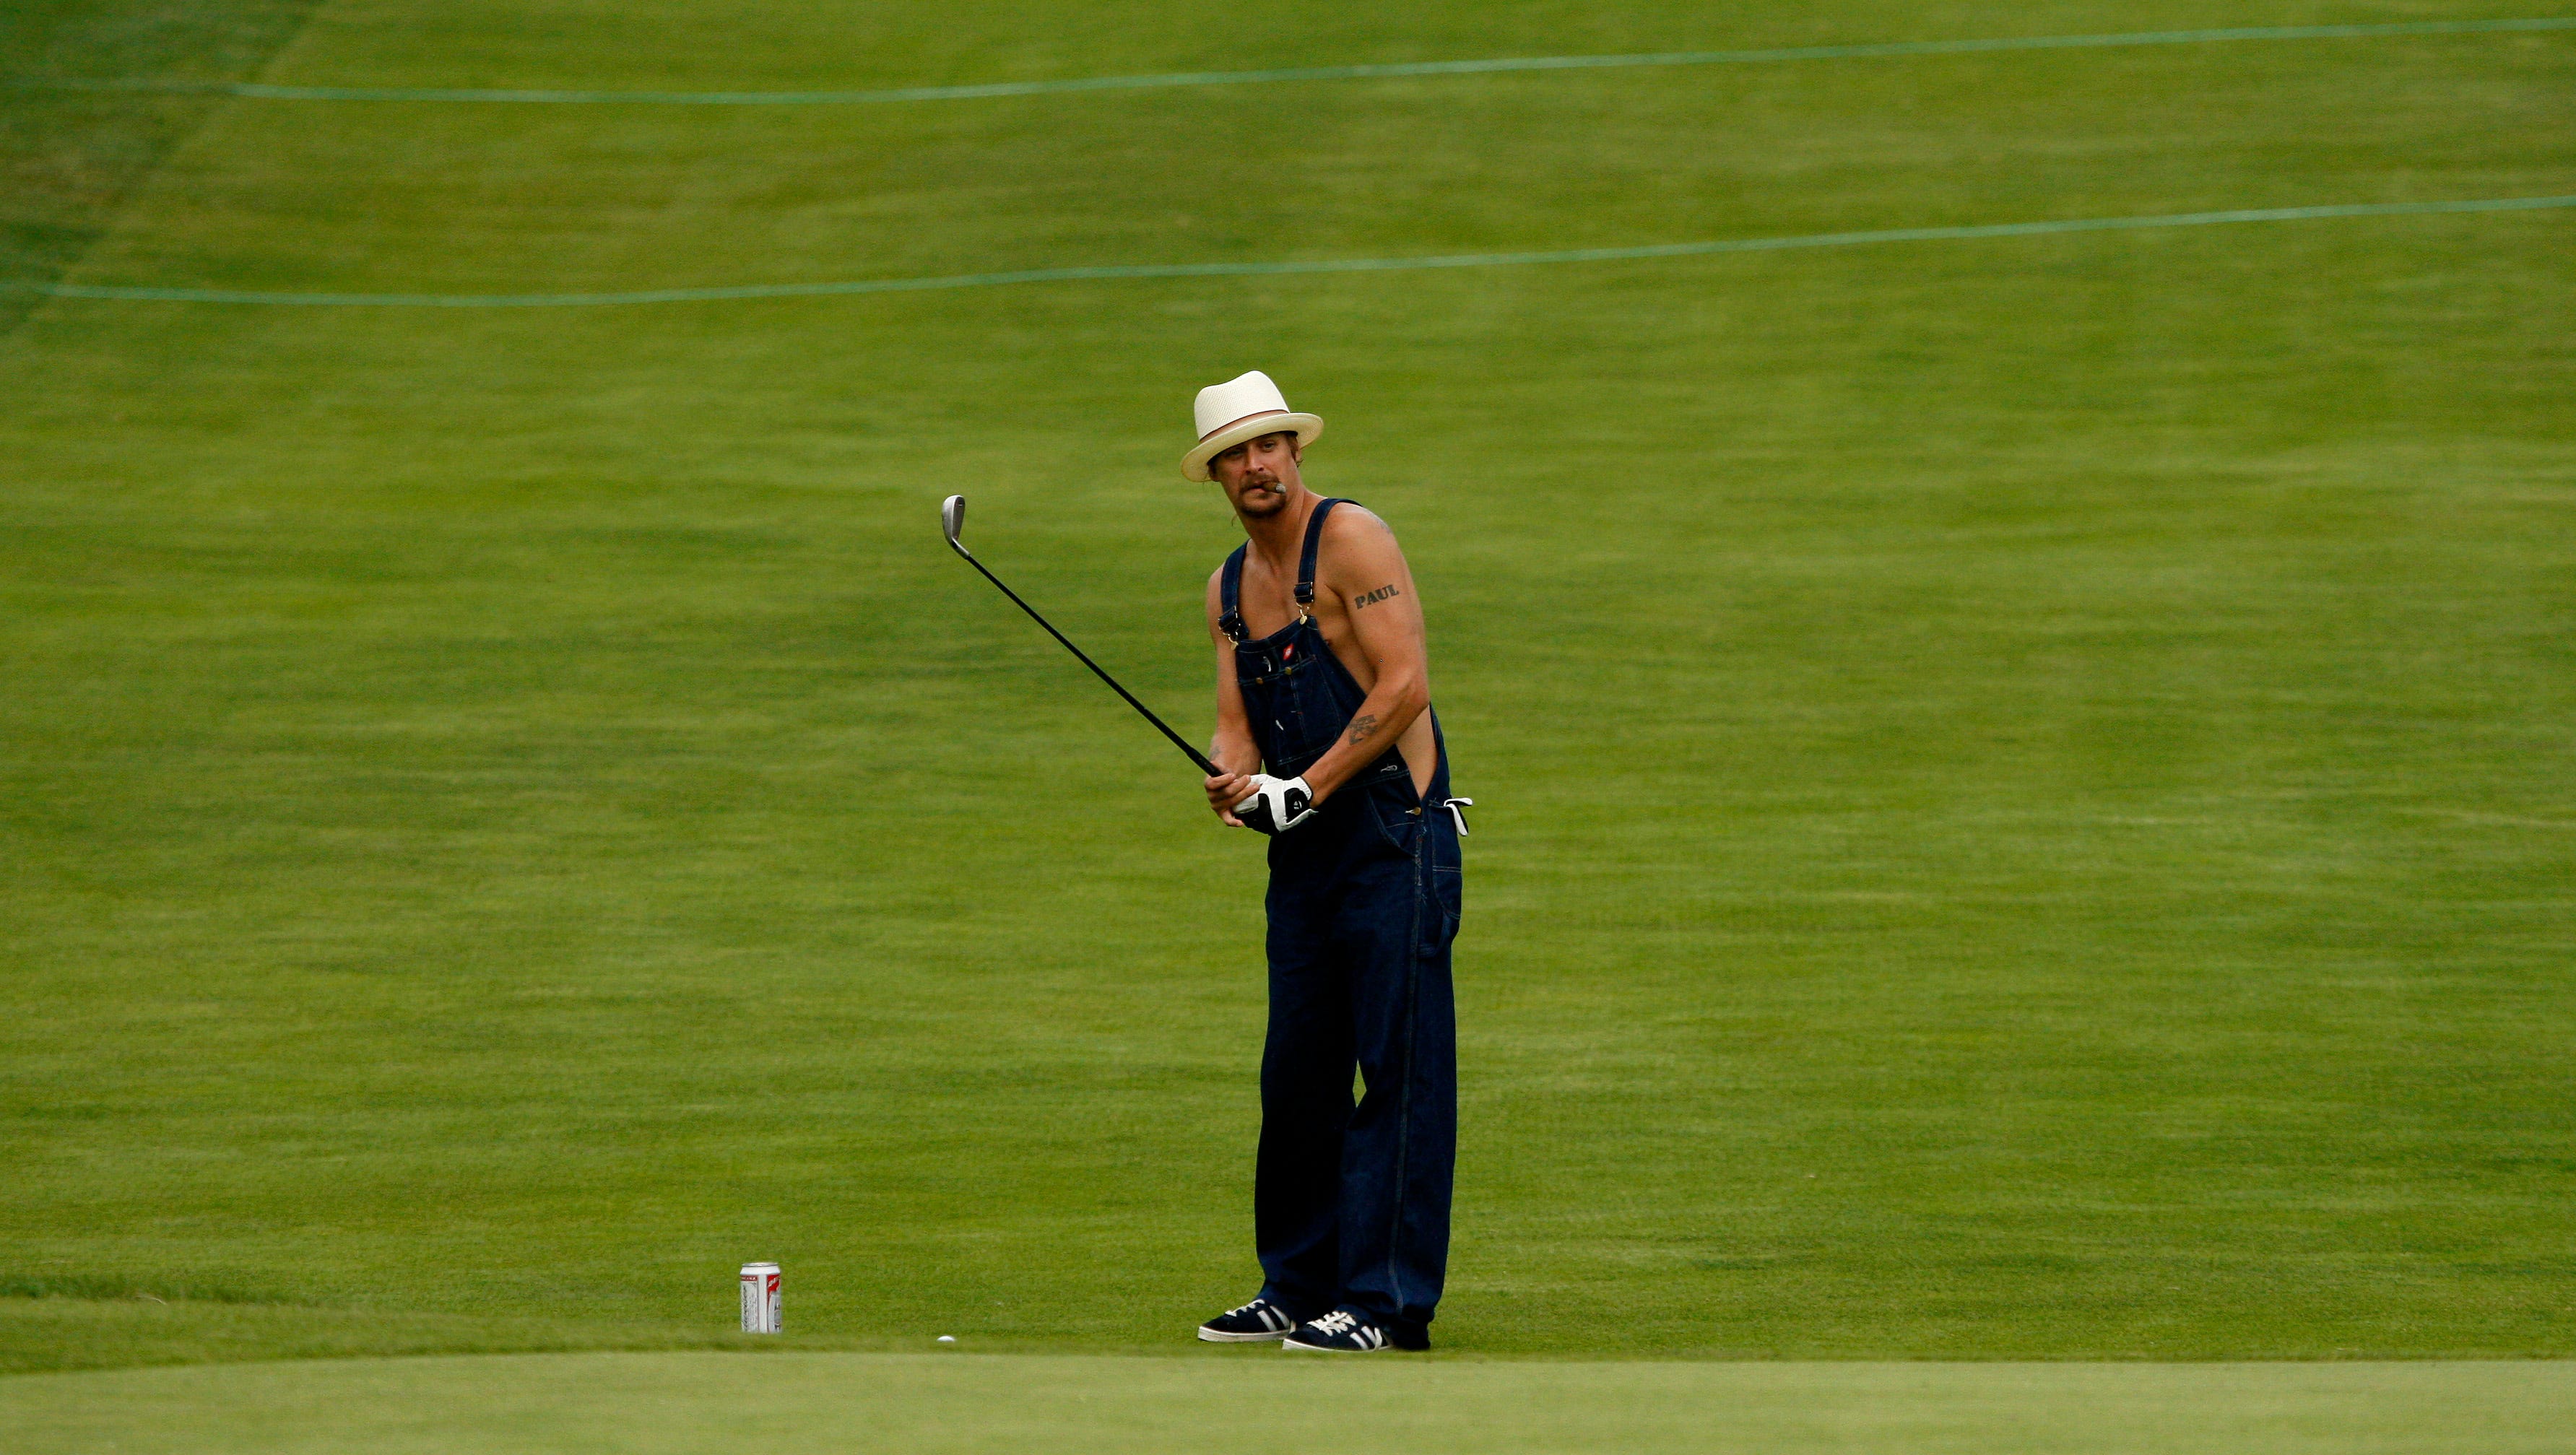 Kid Rock looks to approach the 18th green at the Buick Open pro-am in 2008.